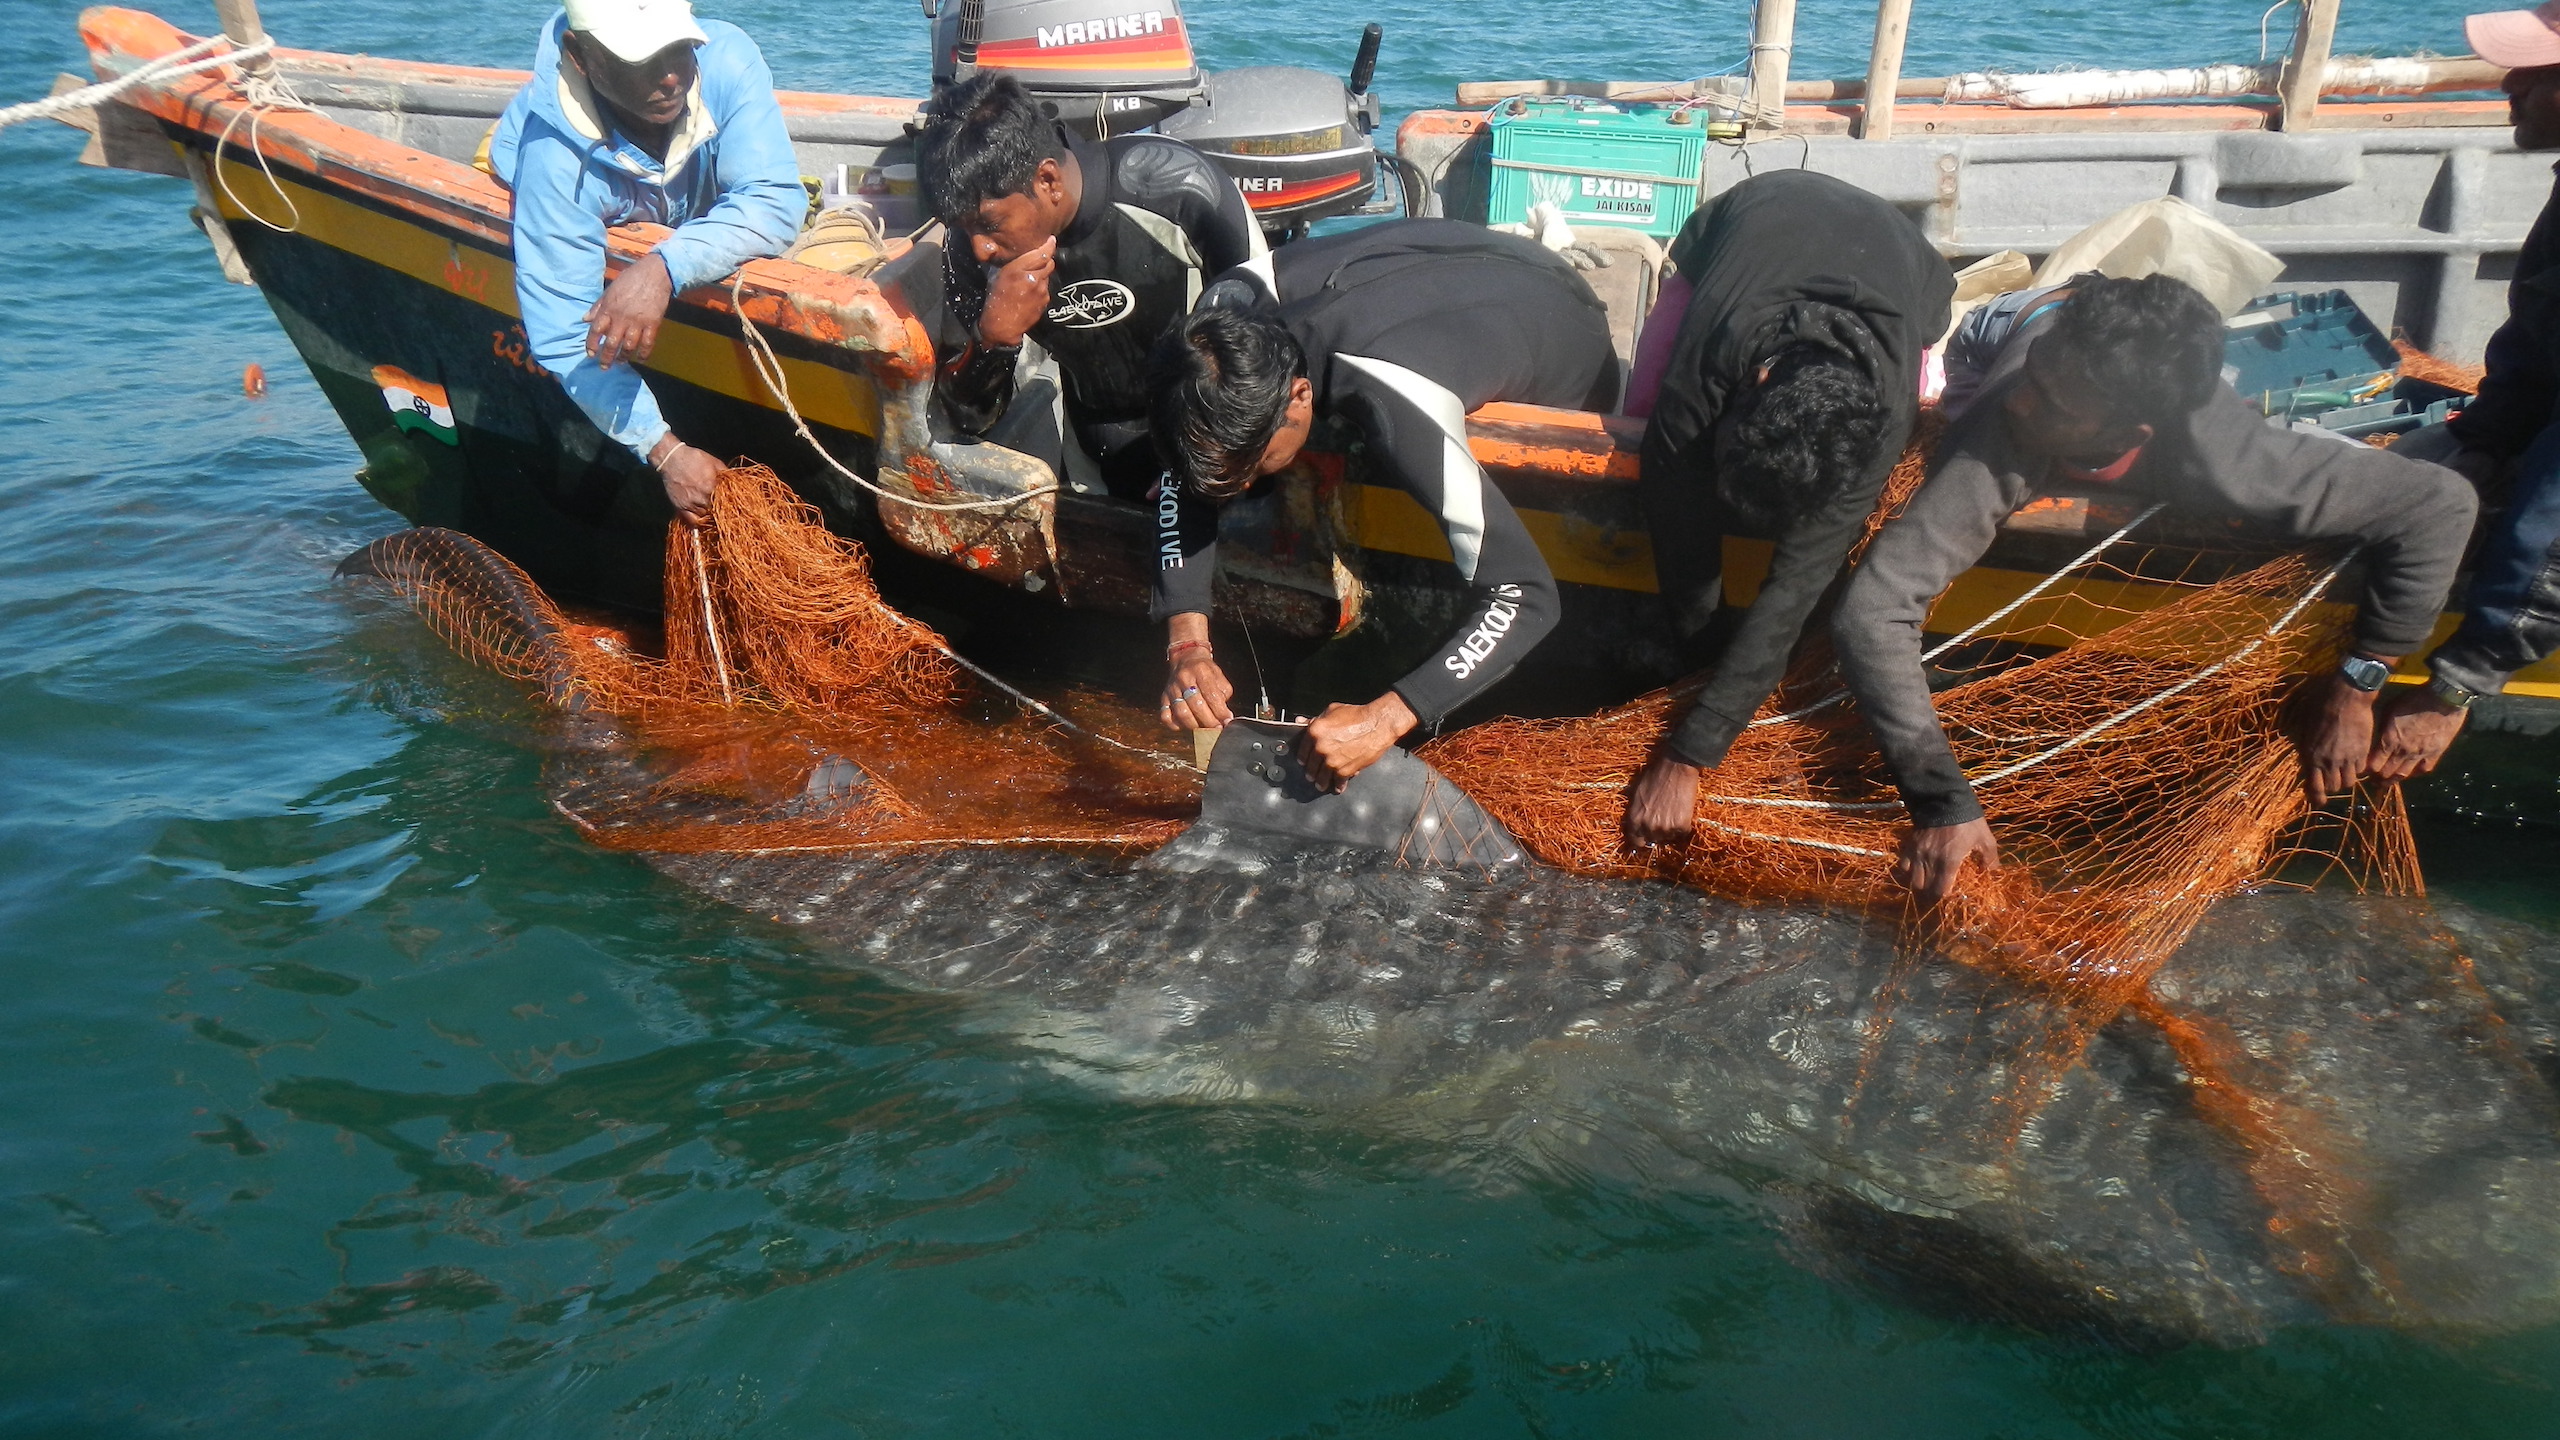 Five men lean off the side of a small boat, trying to remove orange netting from a whale shark in the water